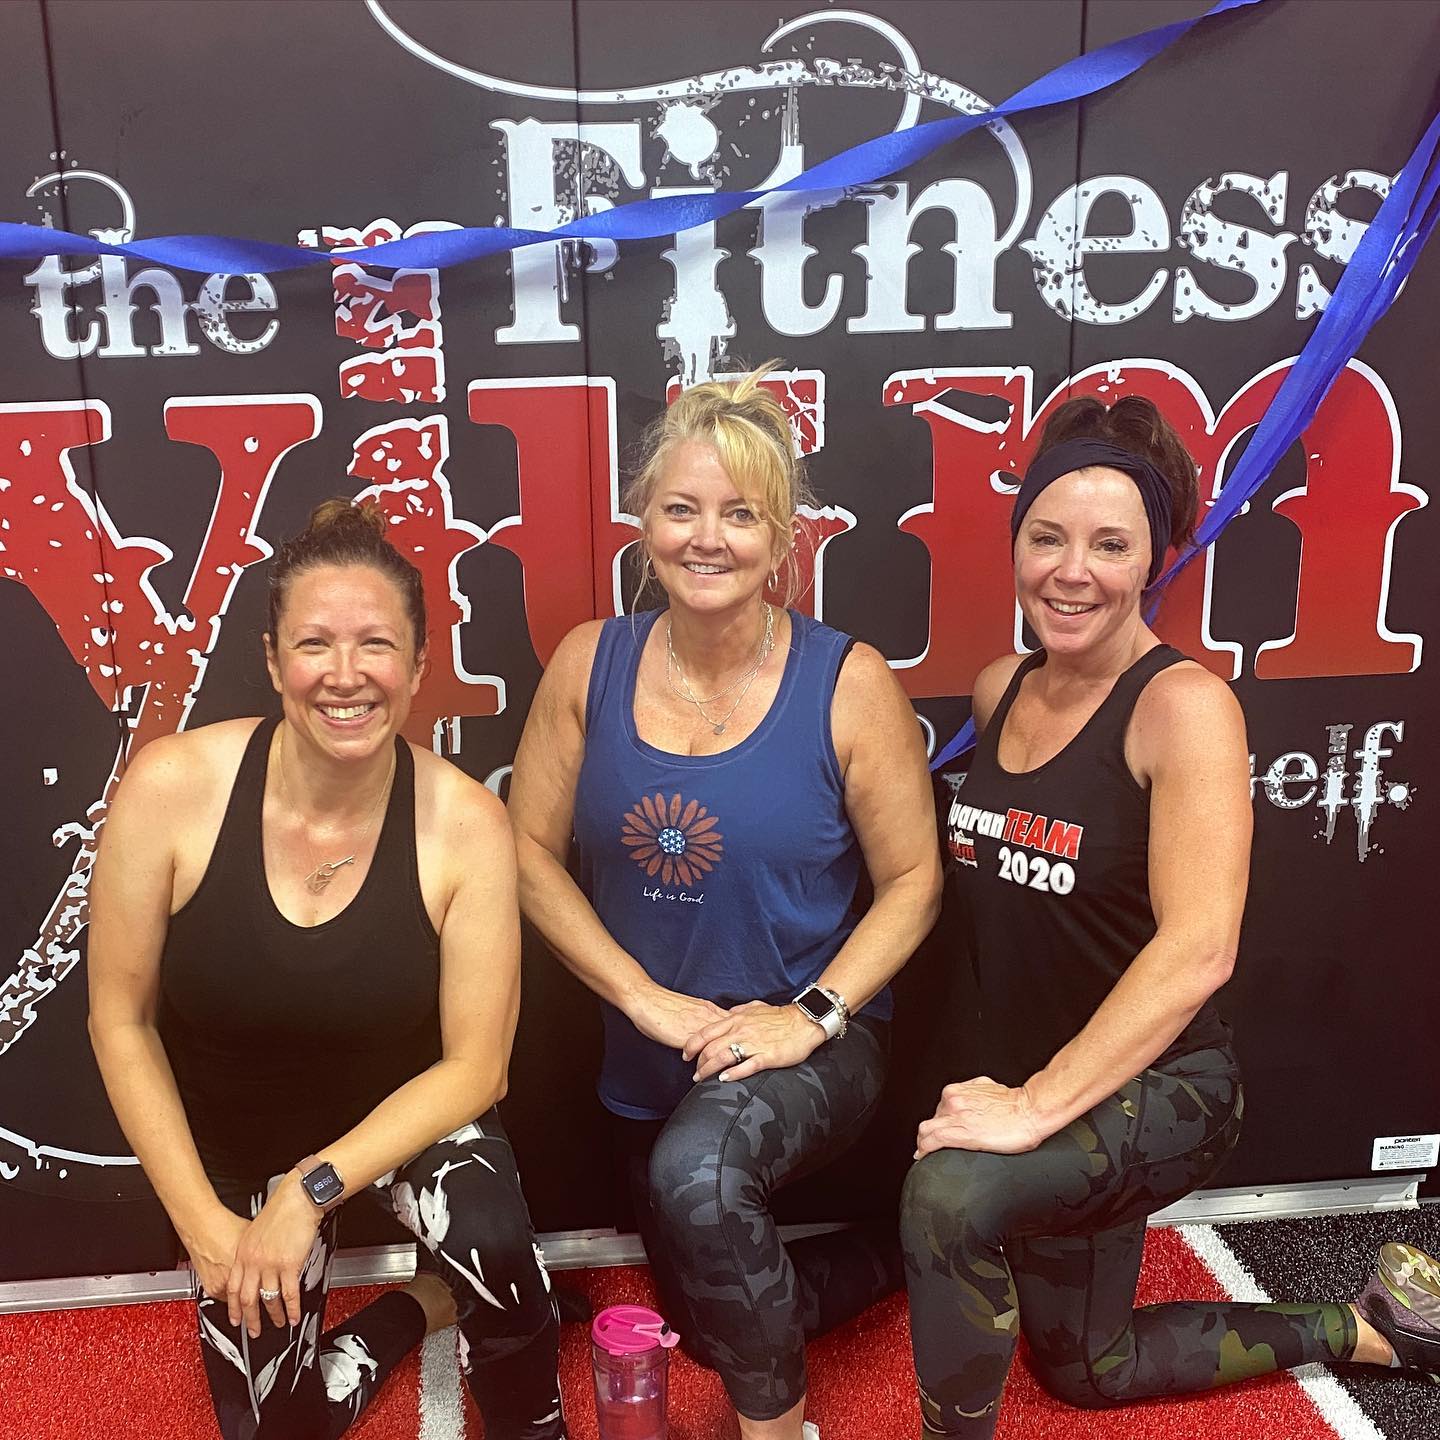 The @ardentstaffing team joined forces with @fitnessasylum to support Katie Zereski  Any friend of Kristie’s is a friend of ours.  Keep fighting!